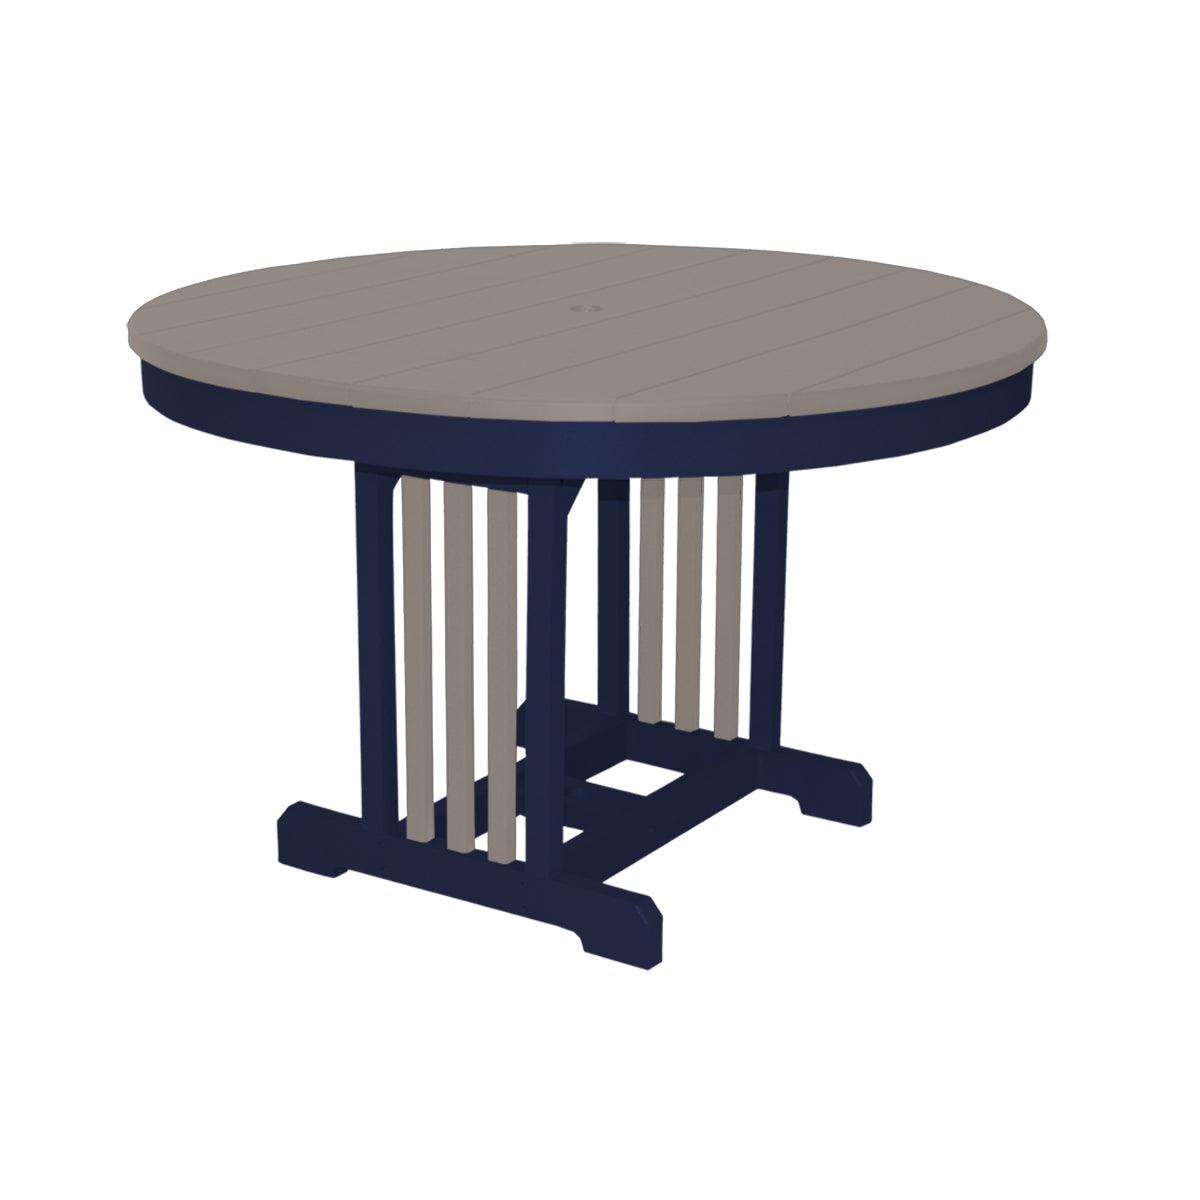 48 Inch Round Mission Table